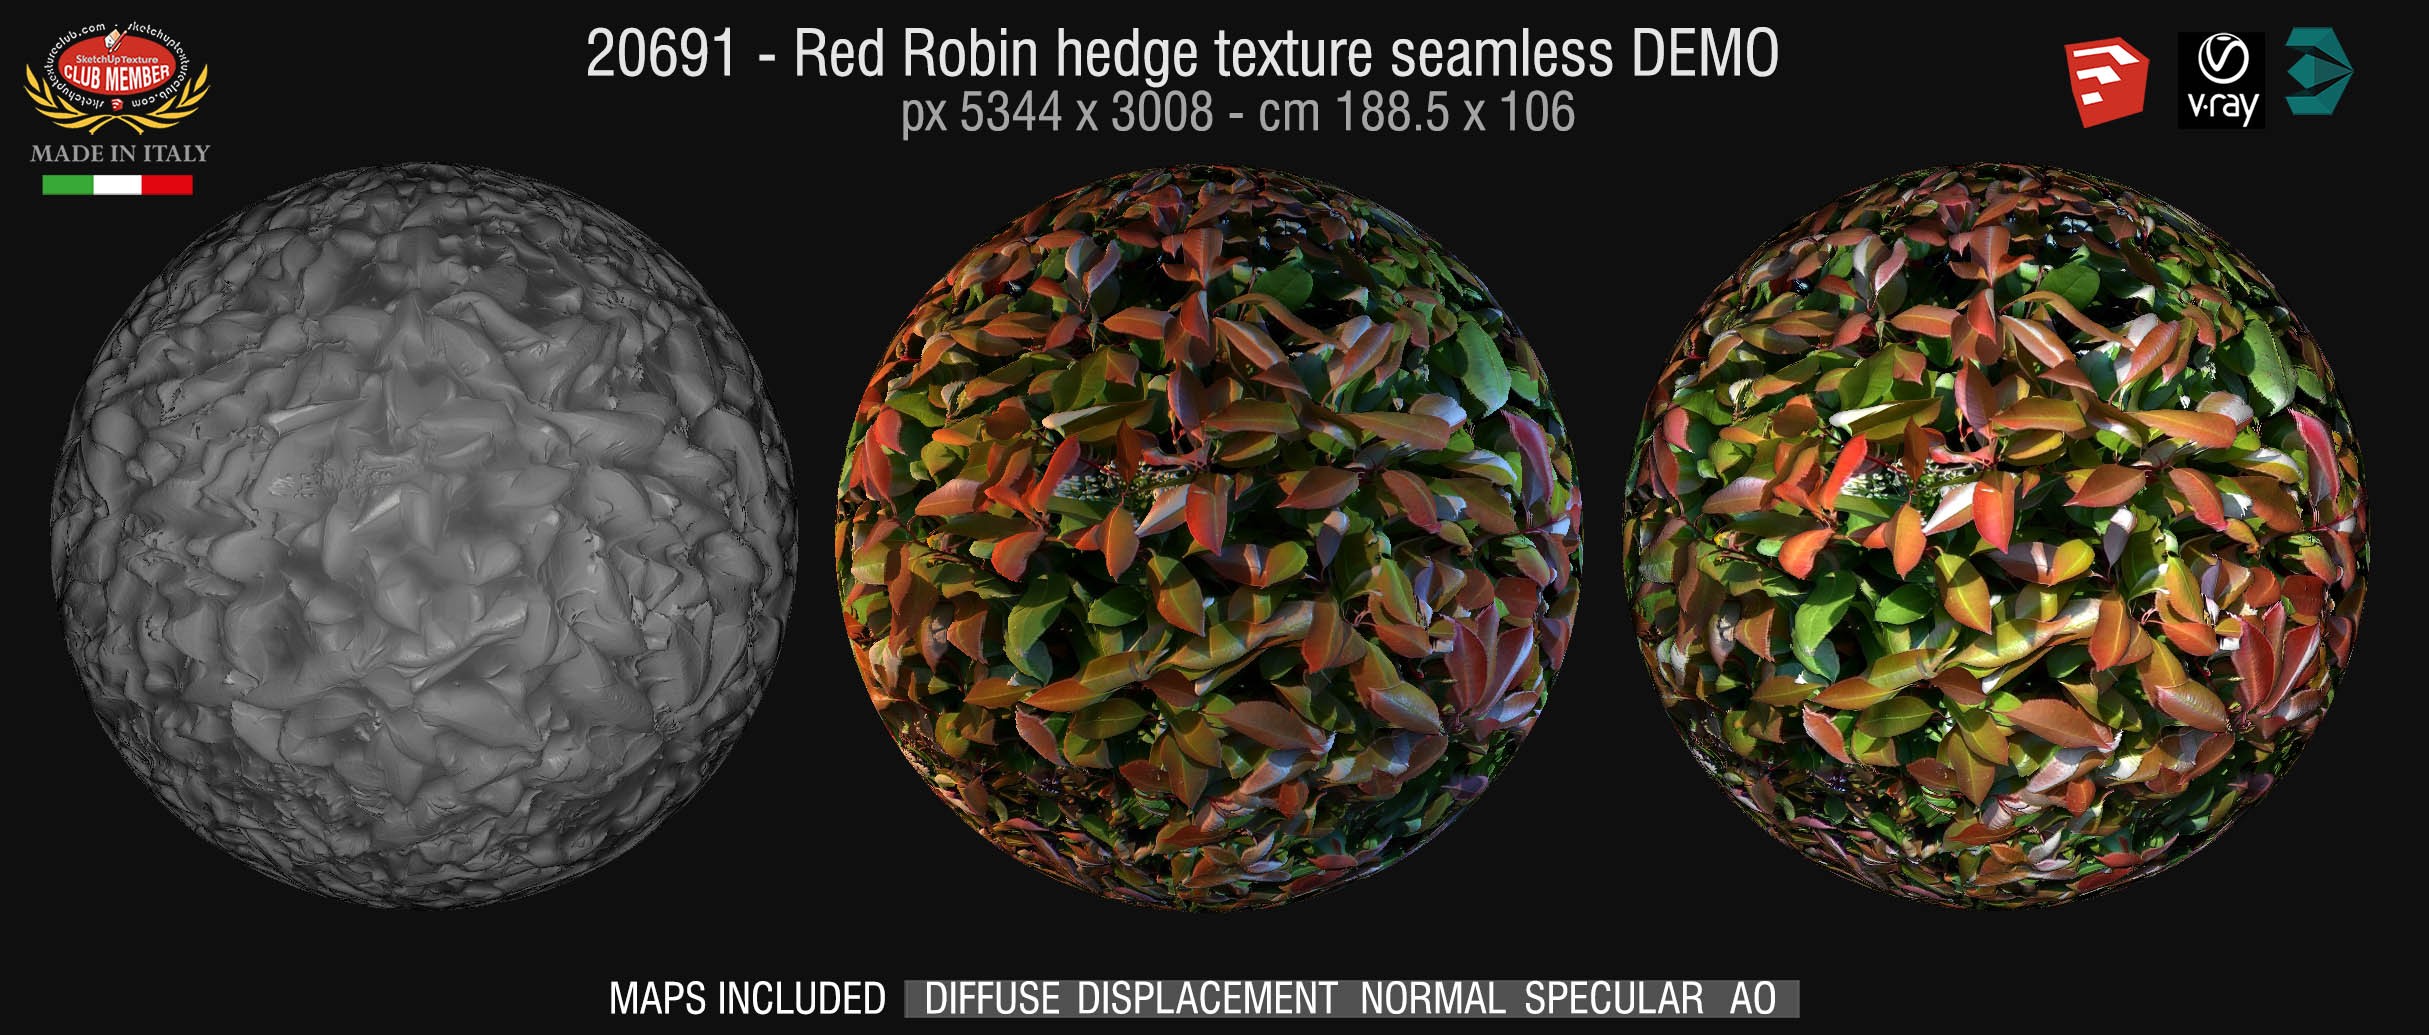 20691 HR Red robin hedge texture + maps DEMO